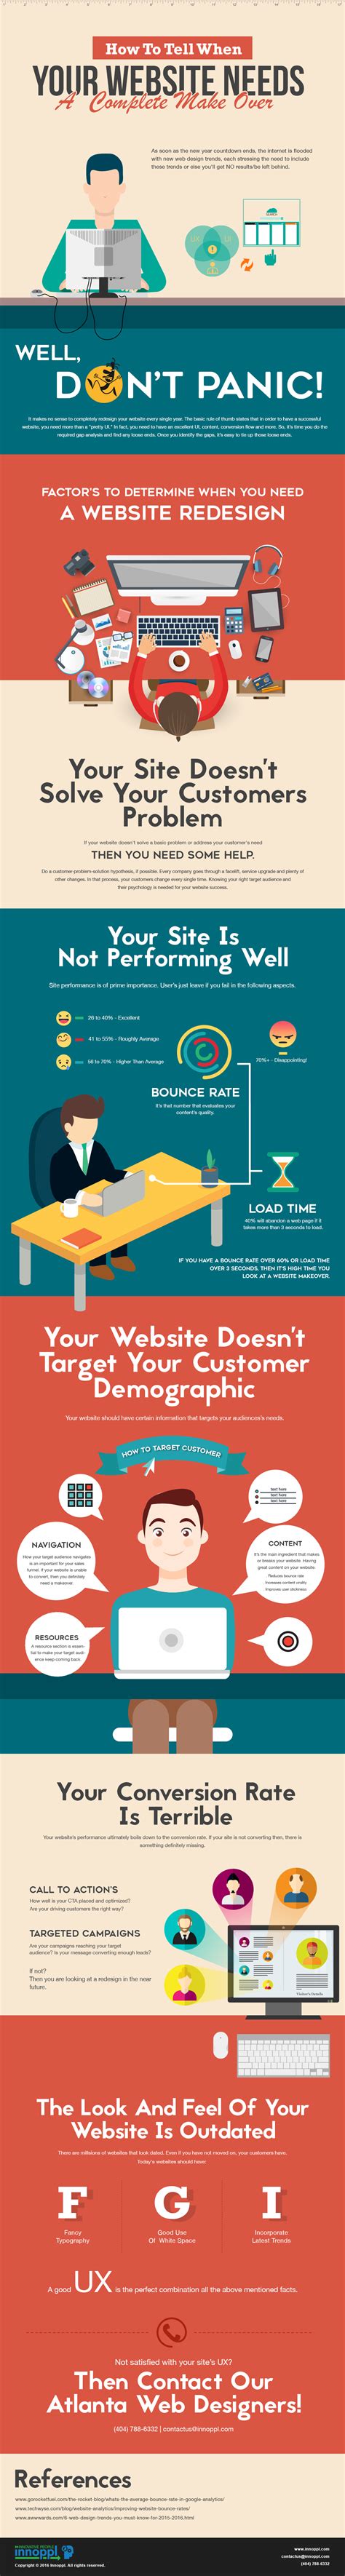 How To Tell When Your Website Needs A Complete Makeover Infographic